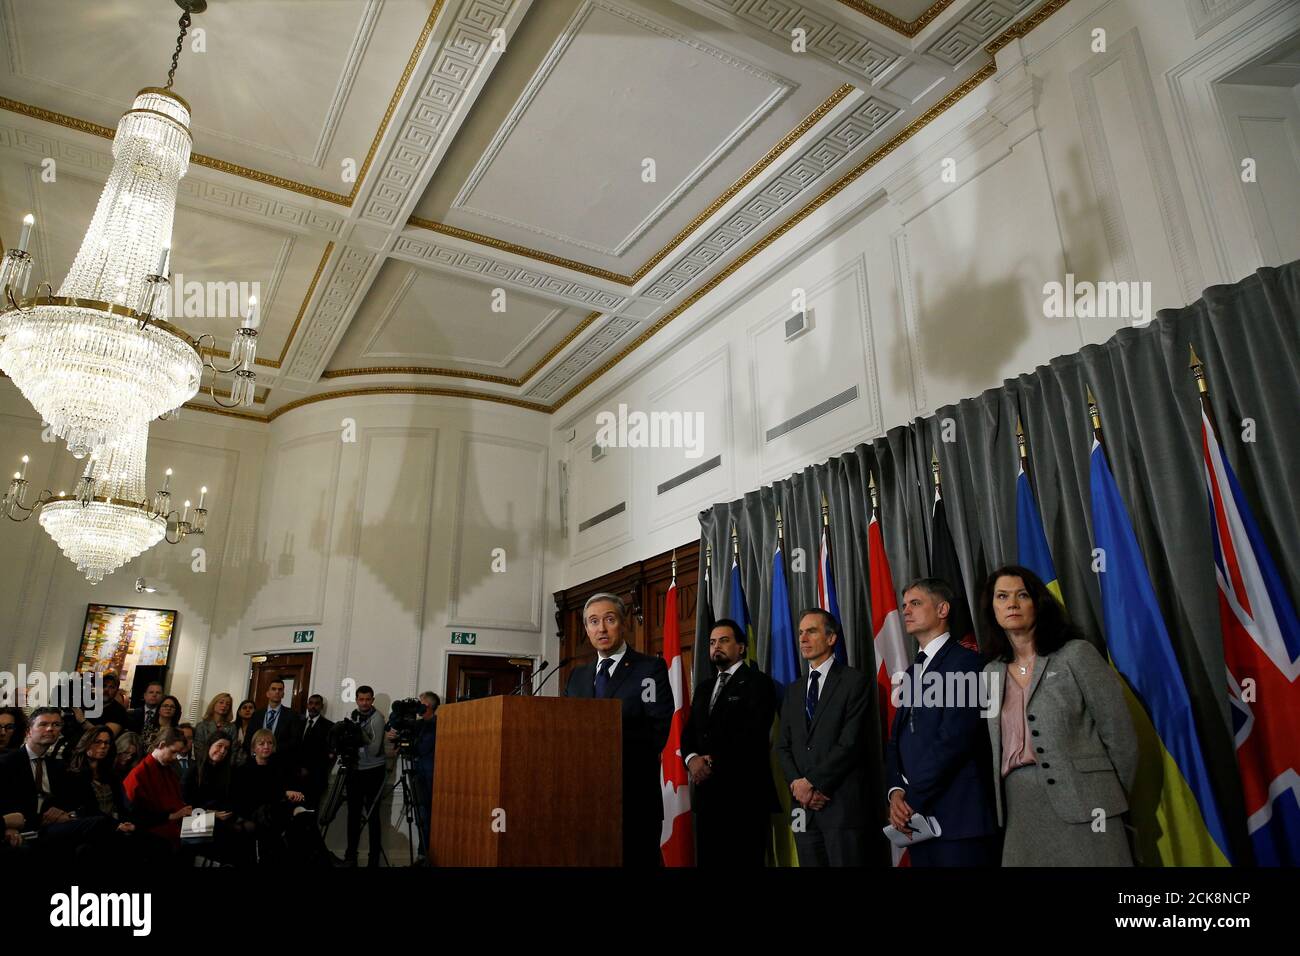 Canada's Minister of Foreign Affairs Francois-Philippe Champagne speaks during a news conference, standing next to Sweden's Foreign Minister Ann Linde, Ukraine's Foreign Minister Vadym Prystaiko, Afghanistan's acting Foreign Minister Idrees Zaman and British MP Andrew Murrison, after a meeting of the International Coordination and Response Group for the families of the victims of the Ukraine International flight which crashed in Iran, at the High Commission of Canada in London, Britain January 16, 2020.     REUTERS/Henry Nicholls Stock Photo